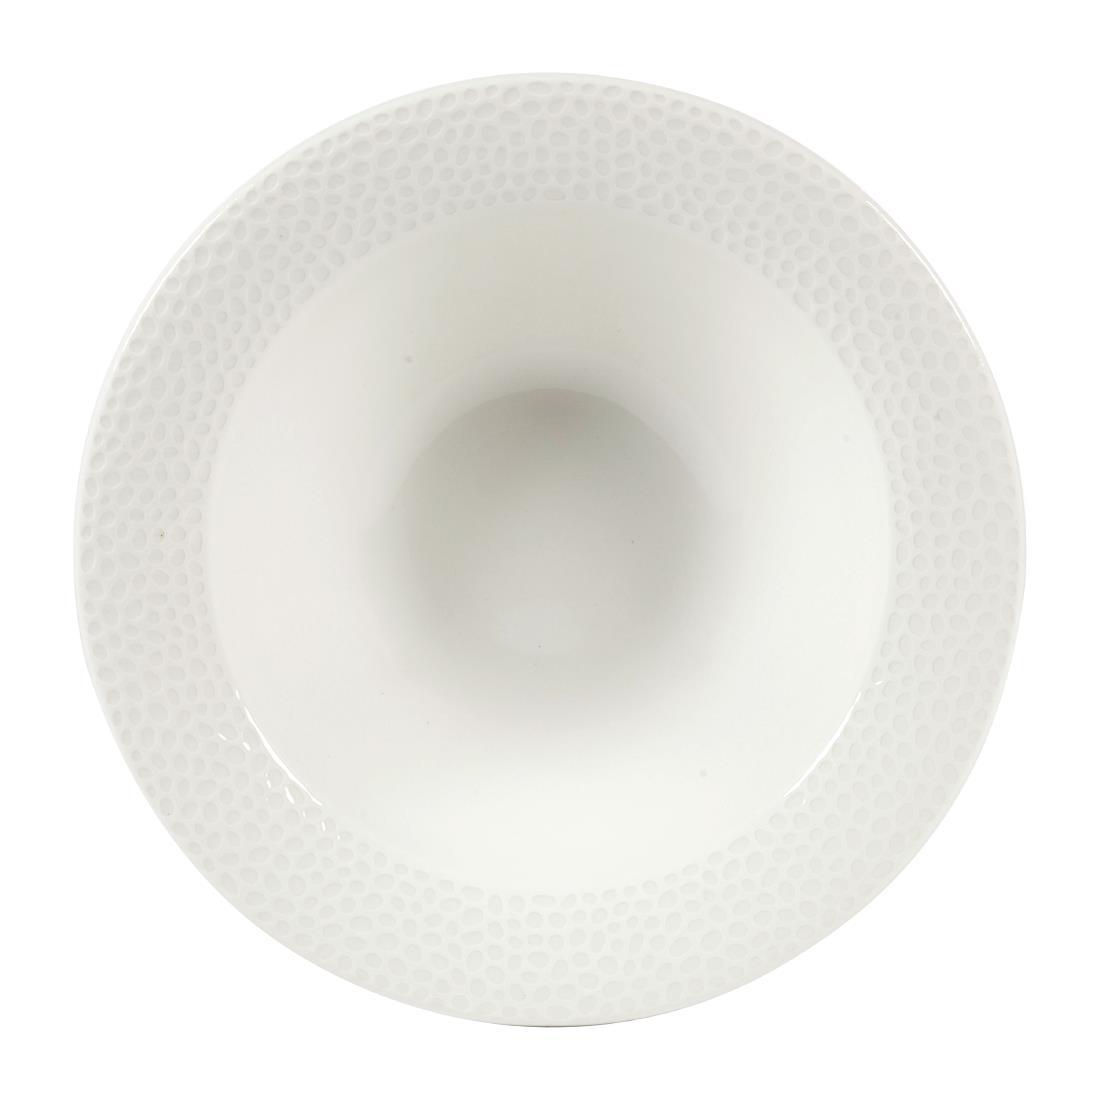 Churchill Isla Oatmeal Bowl White 170mm (Pack of 12) - DY841  - 1